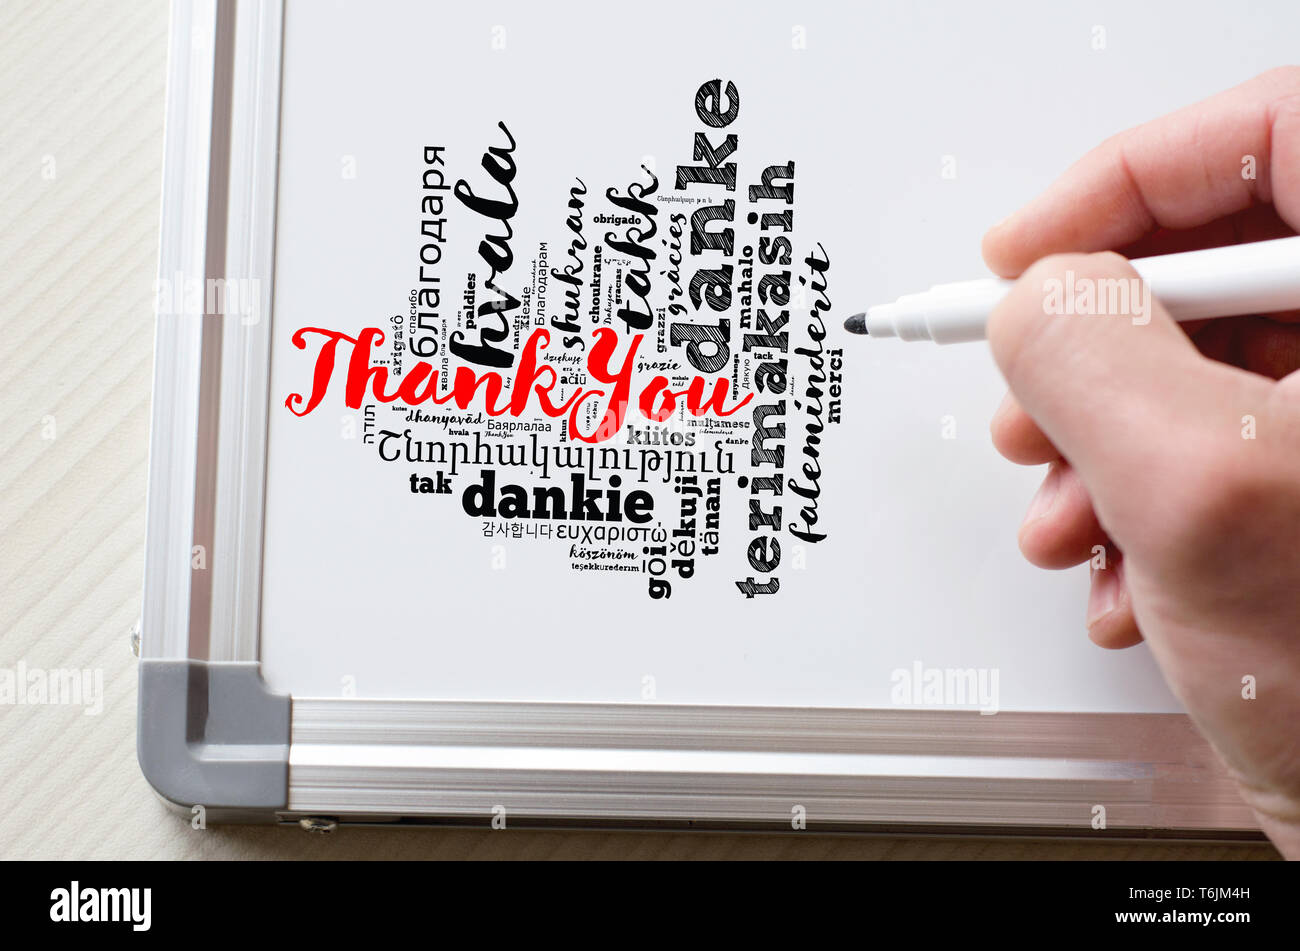 Thank You word cloud in different languages with marker and whiteboard Stock Photo